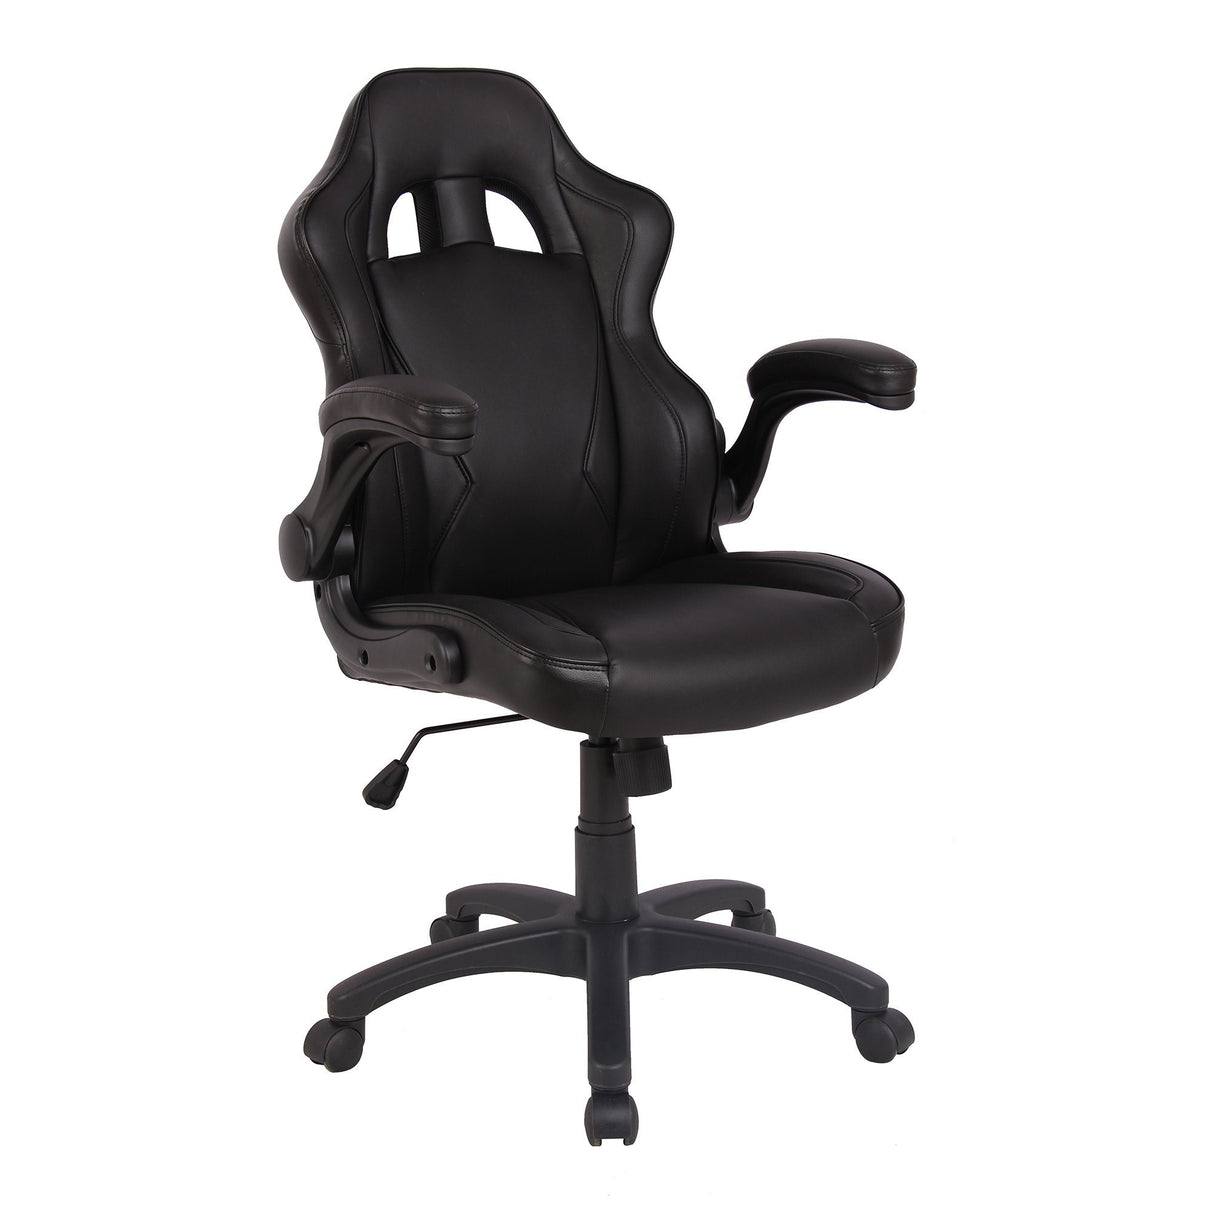 Nautilus Designs Predator  Executive Ergonomic Gaming Style Office Chair with Folding Arms, Integral Headrest and Lumbar Support - Black